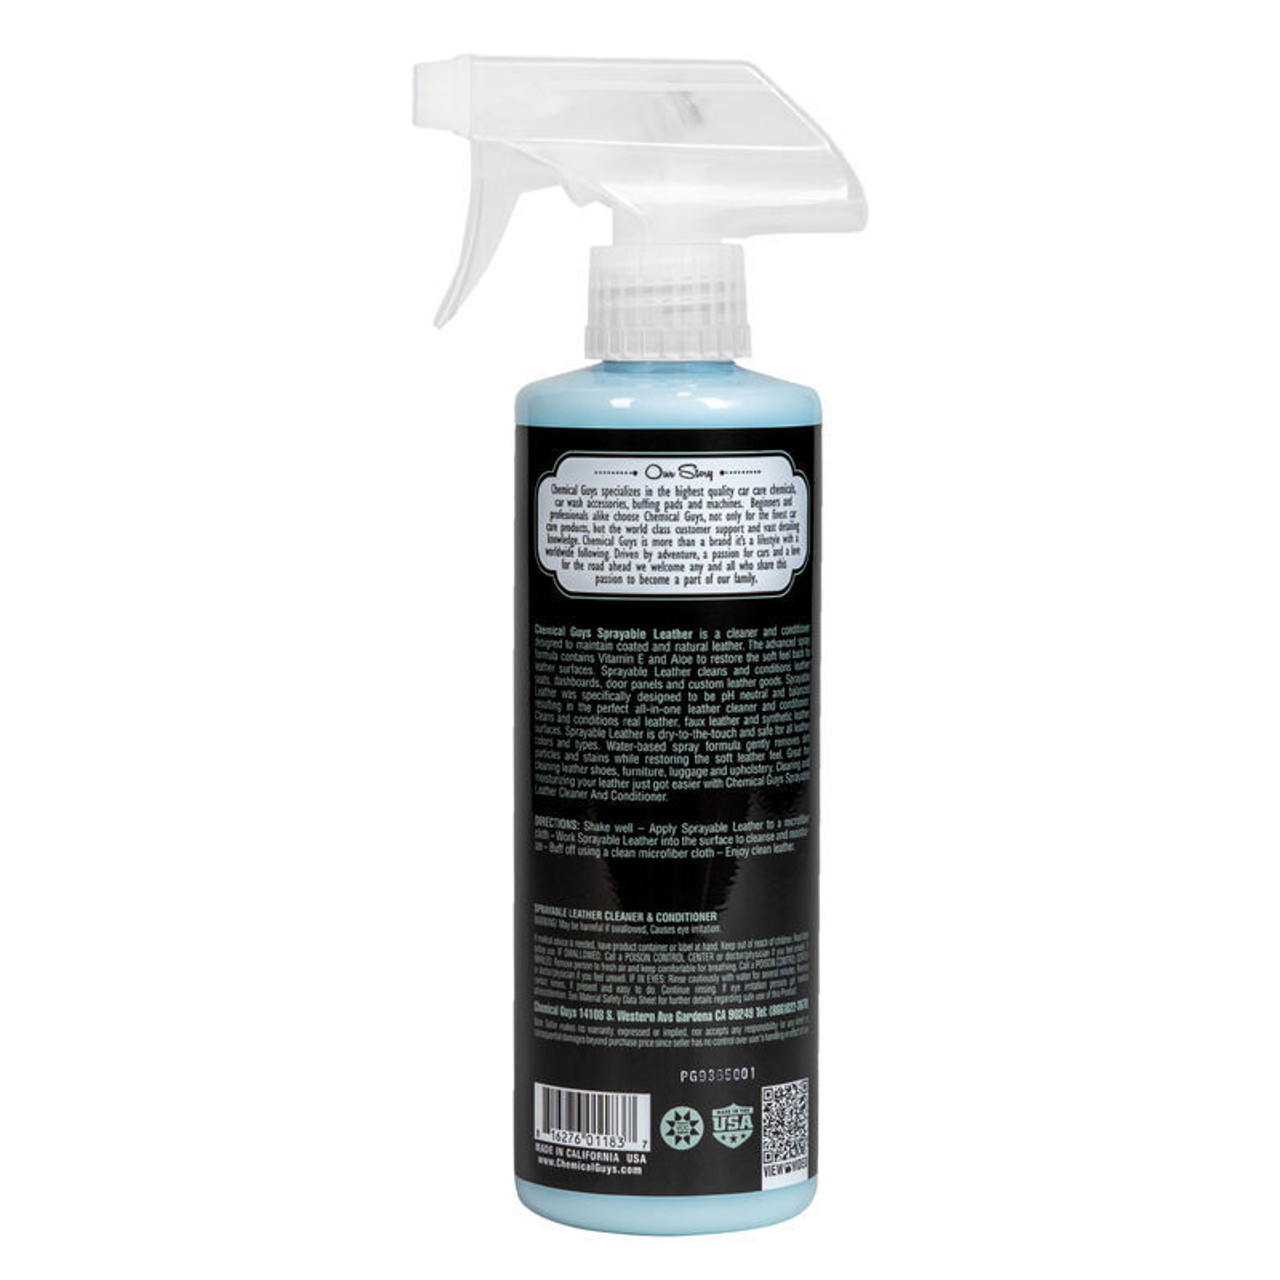 Chemical Guys Sprayable Leather Cleaner & Conditioner In One - Label